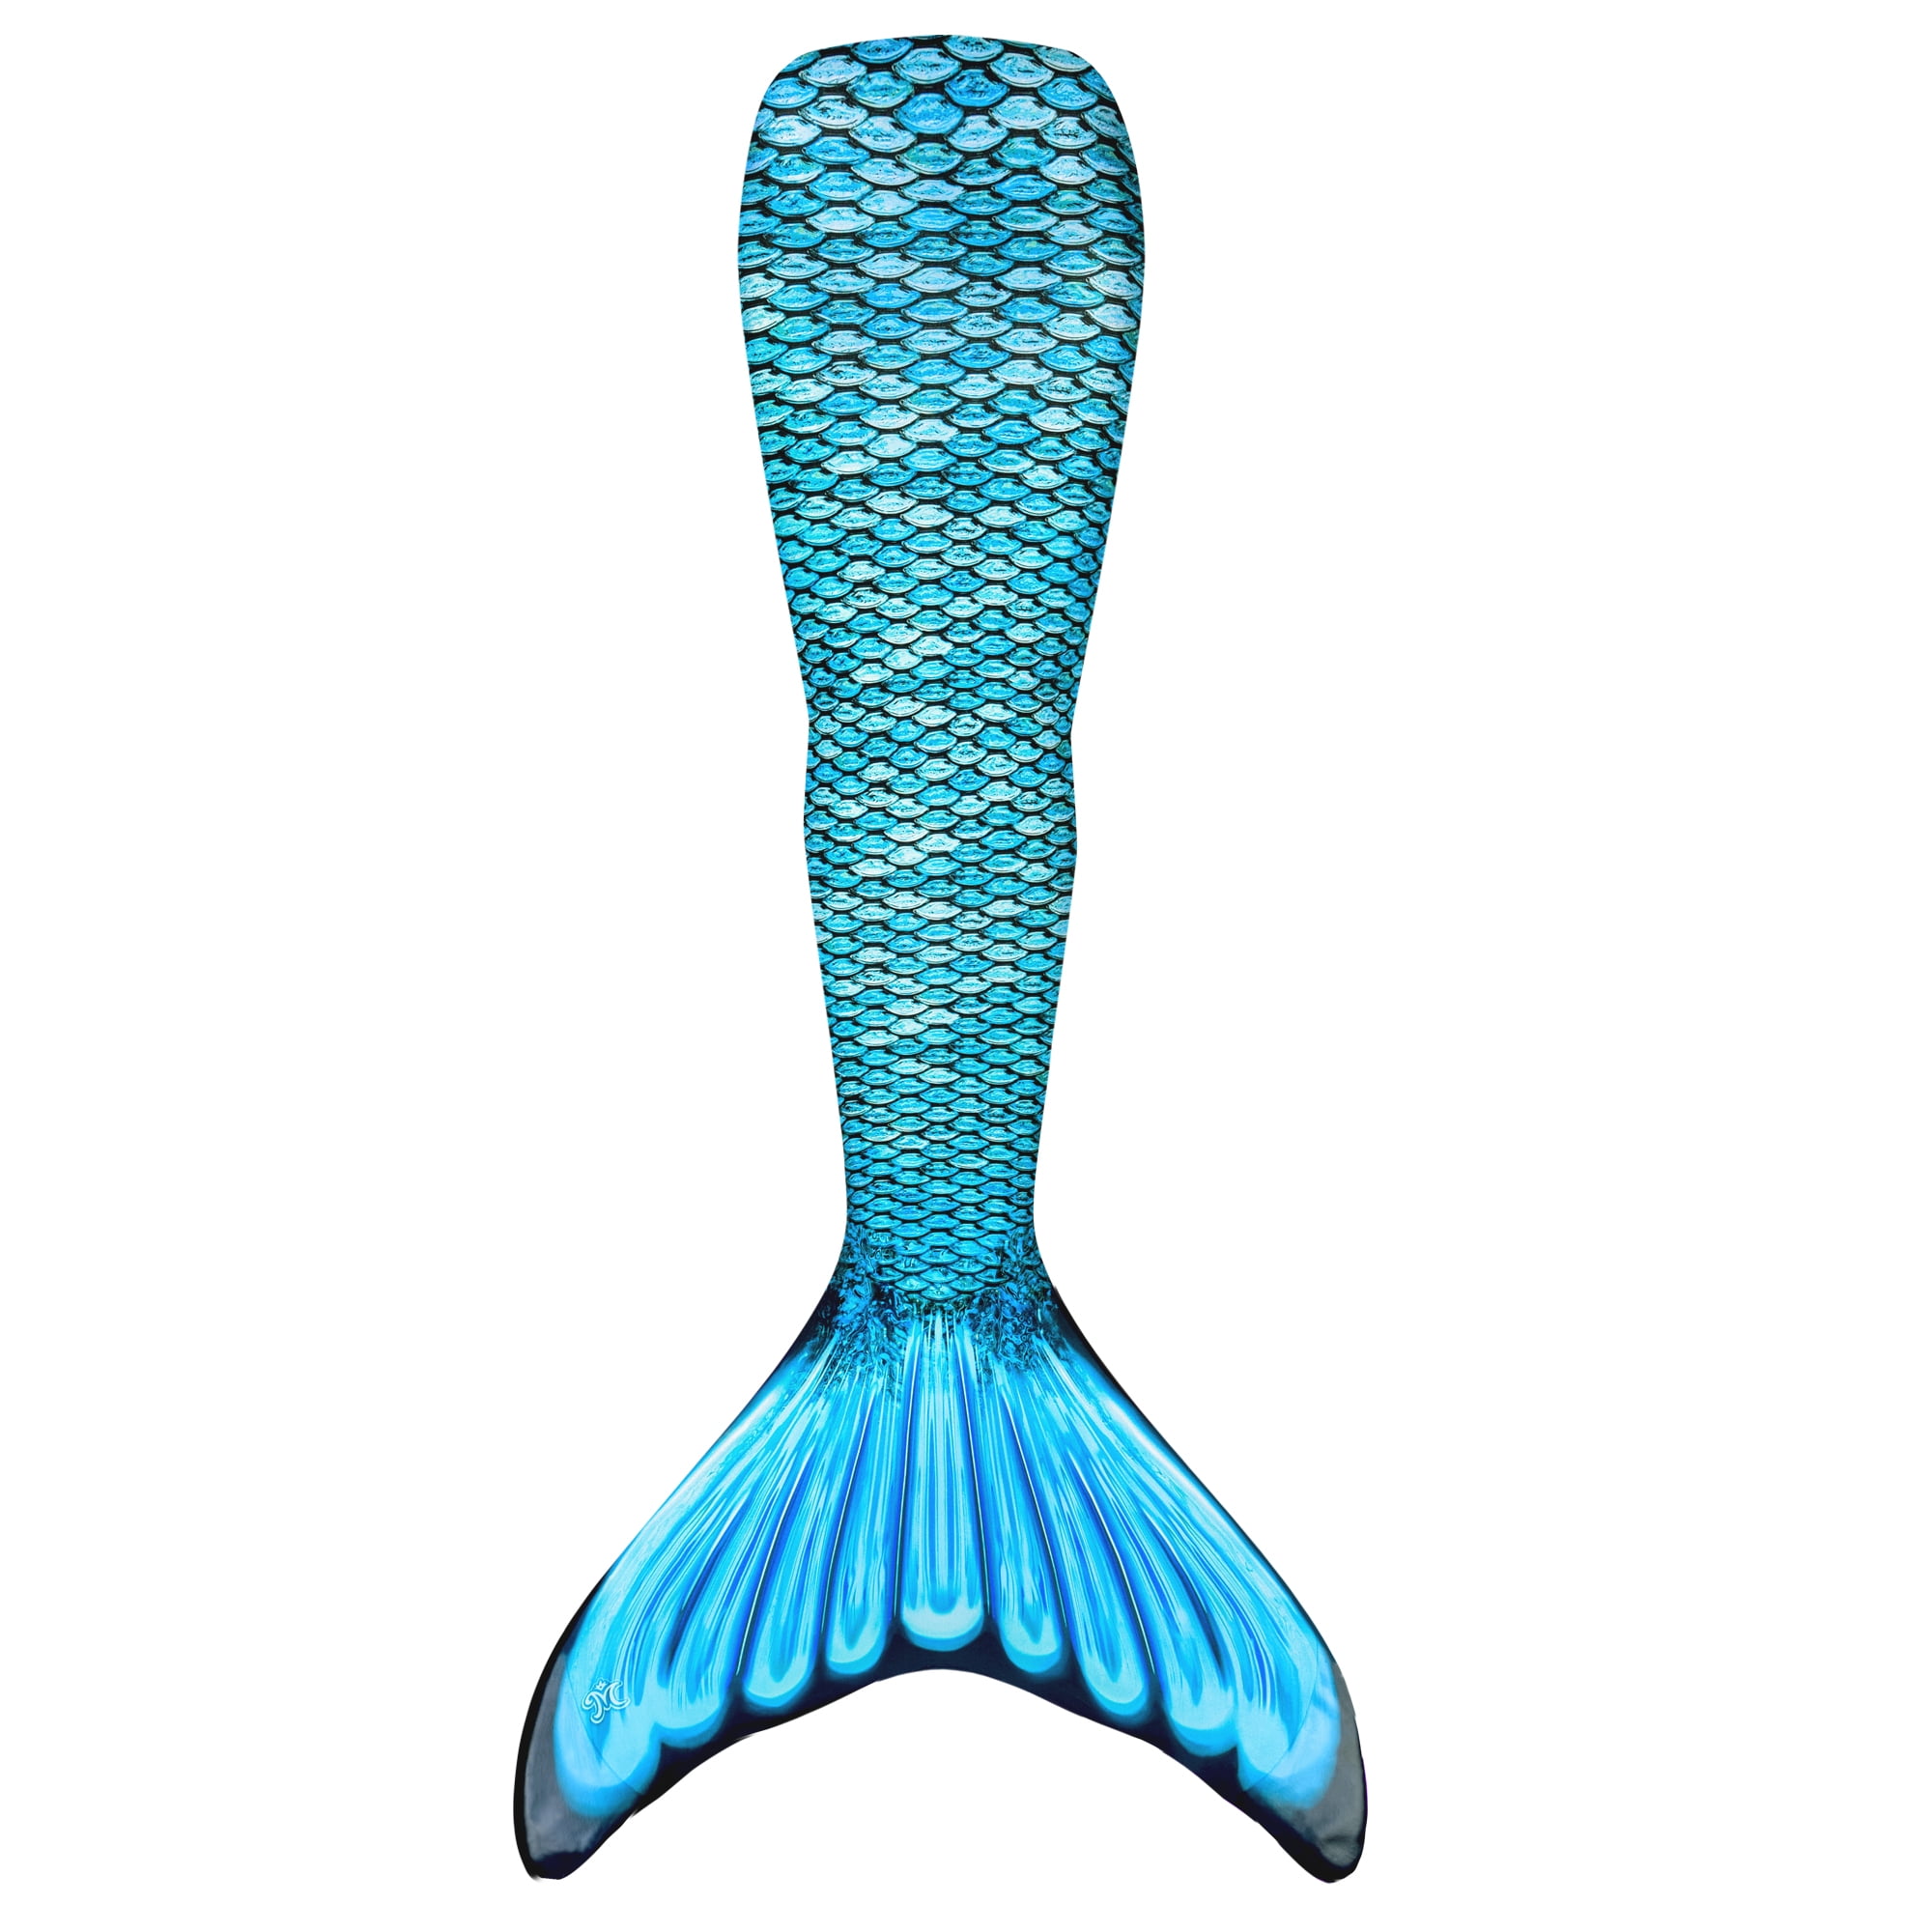 Big Mermaid Tail for Adult Women Men Mermaid Tail with Flipper Beach Costumes 